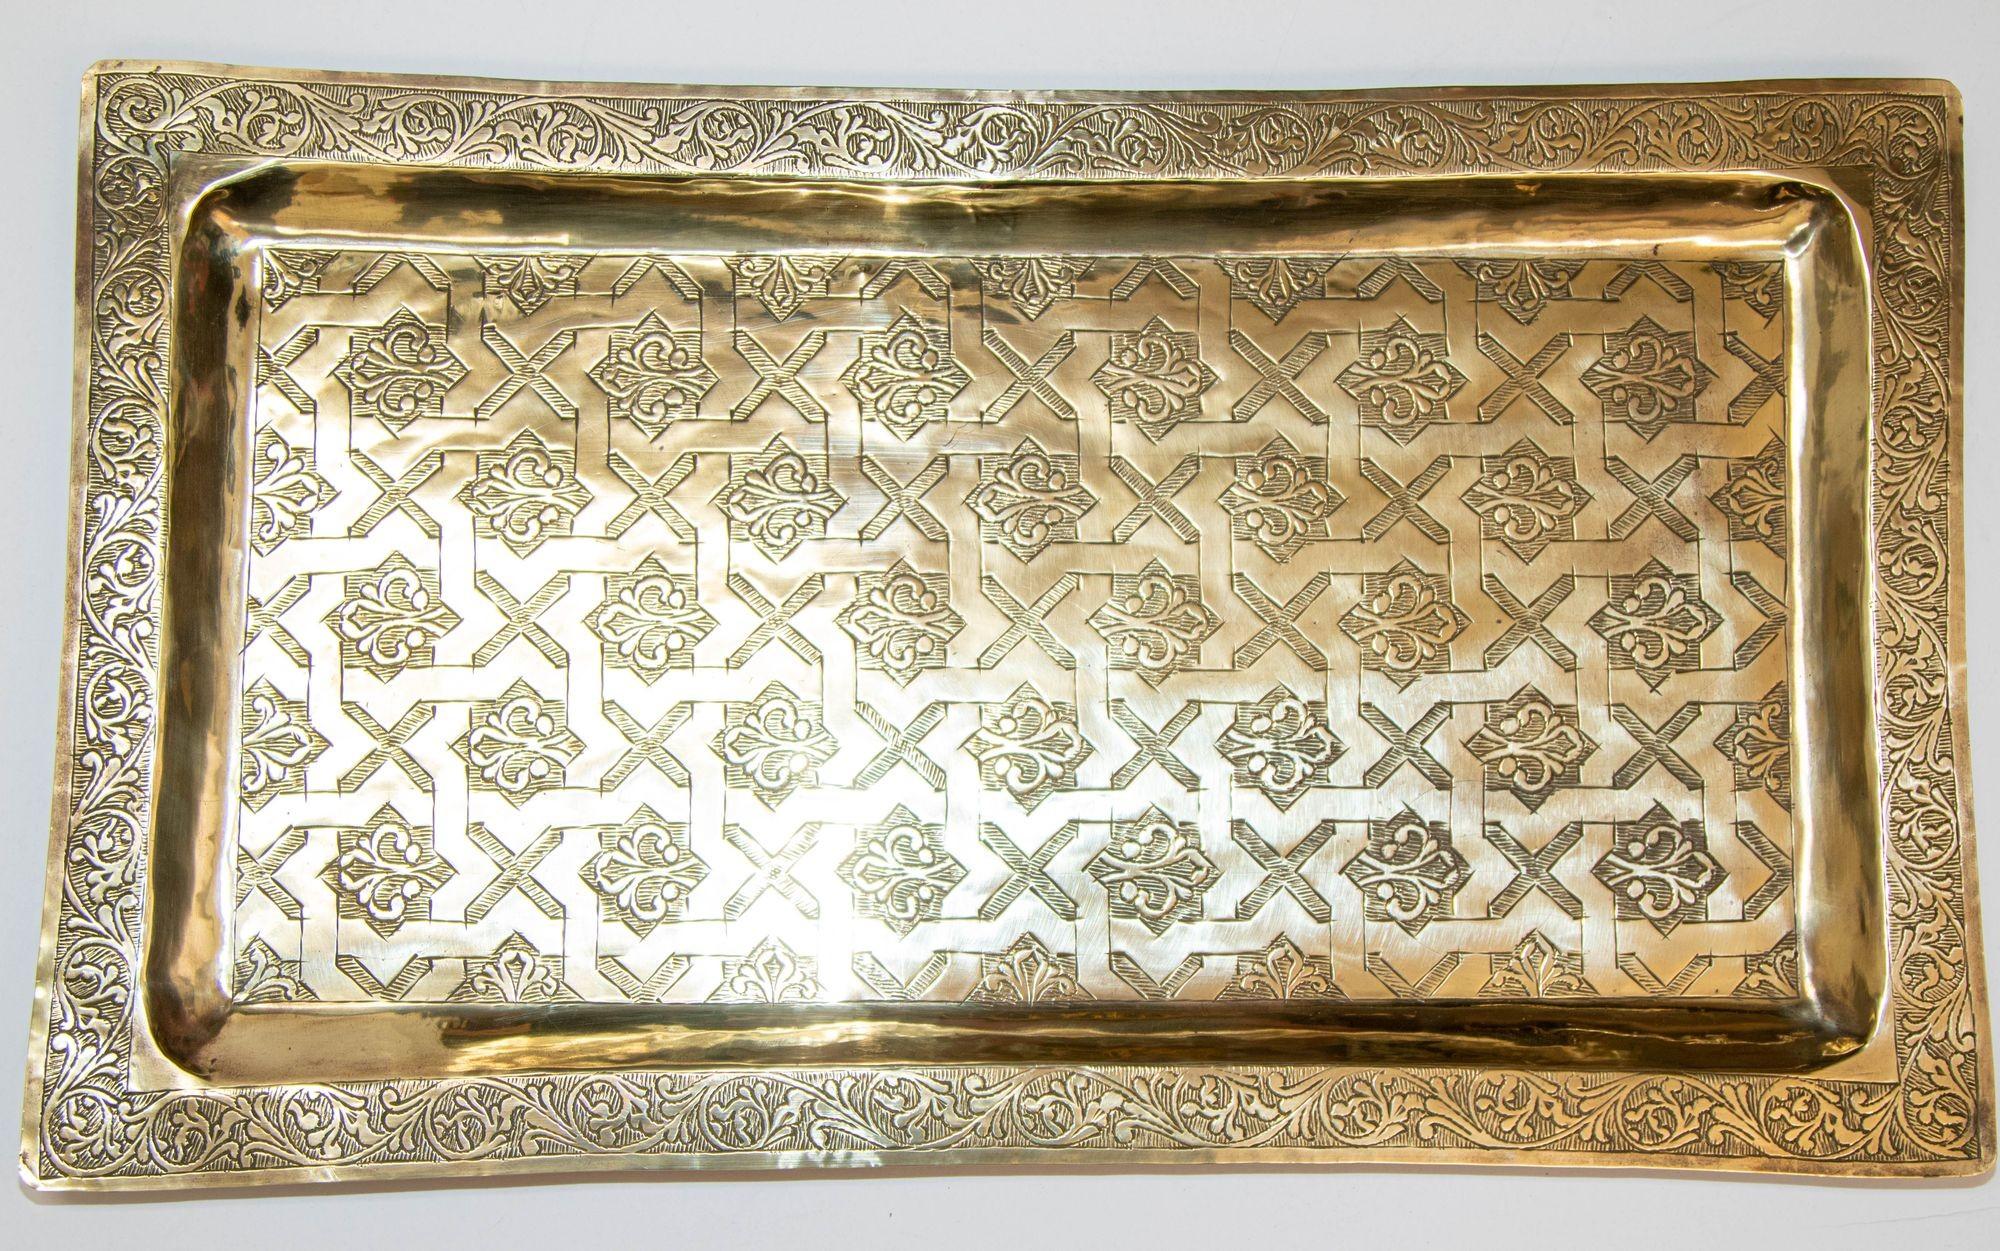 Large antique 1940s Moroccan Rectangular Polished Brass Serving Tray with Moorish geometric design.
Moroccan Moorish rectangular shape heavy solid brass tray with fine delicate geometrical Islamic designs.
Could be used as a serving tray, or